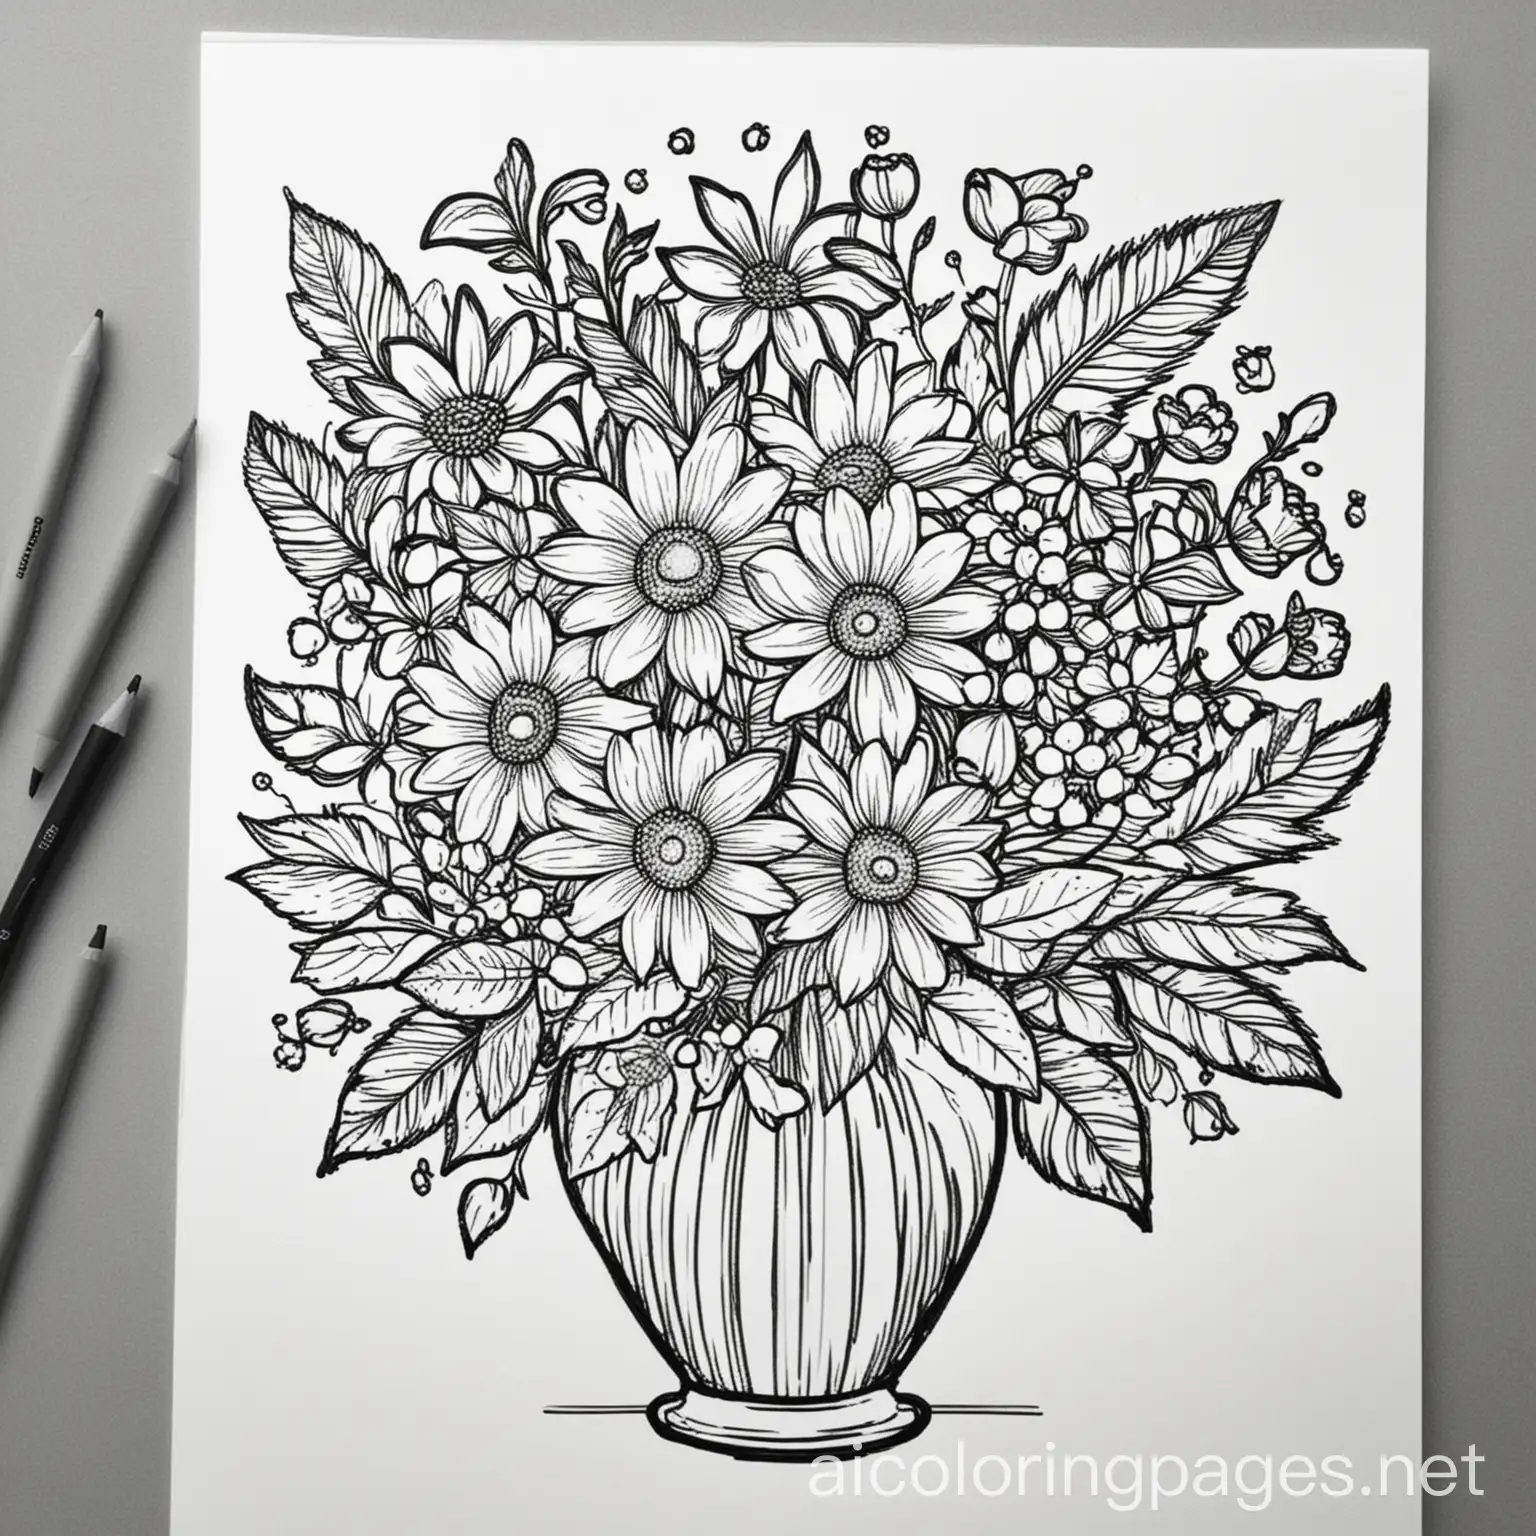 flower bouquet in a vase, Coloring Page, black and white, line art, white background, Simplicity, Ample White Space. The background of the coloring page is plain white to make it easy for young children to color within the lines. The outlines of all the subjects are easy to distinguish, making it simple for kids to color without too much difficulty